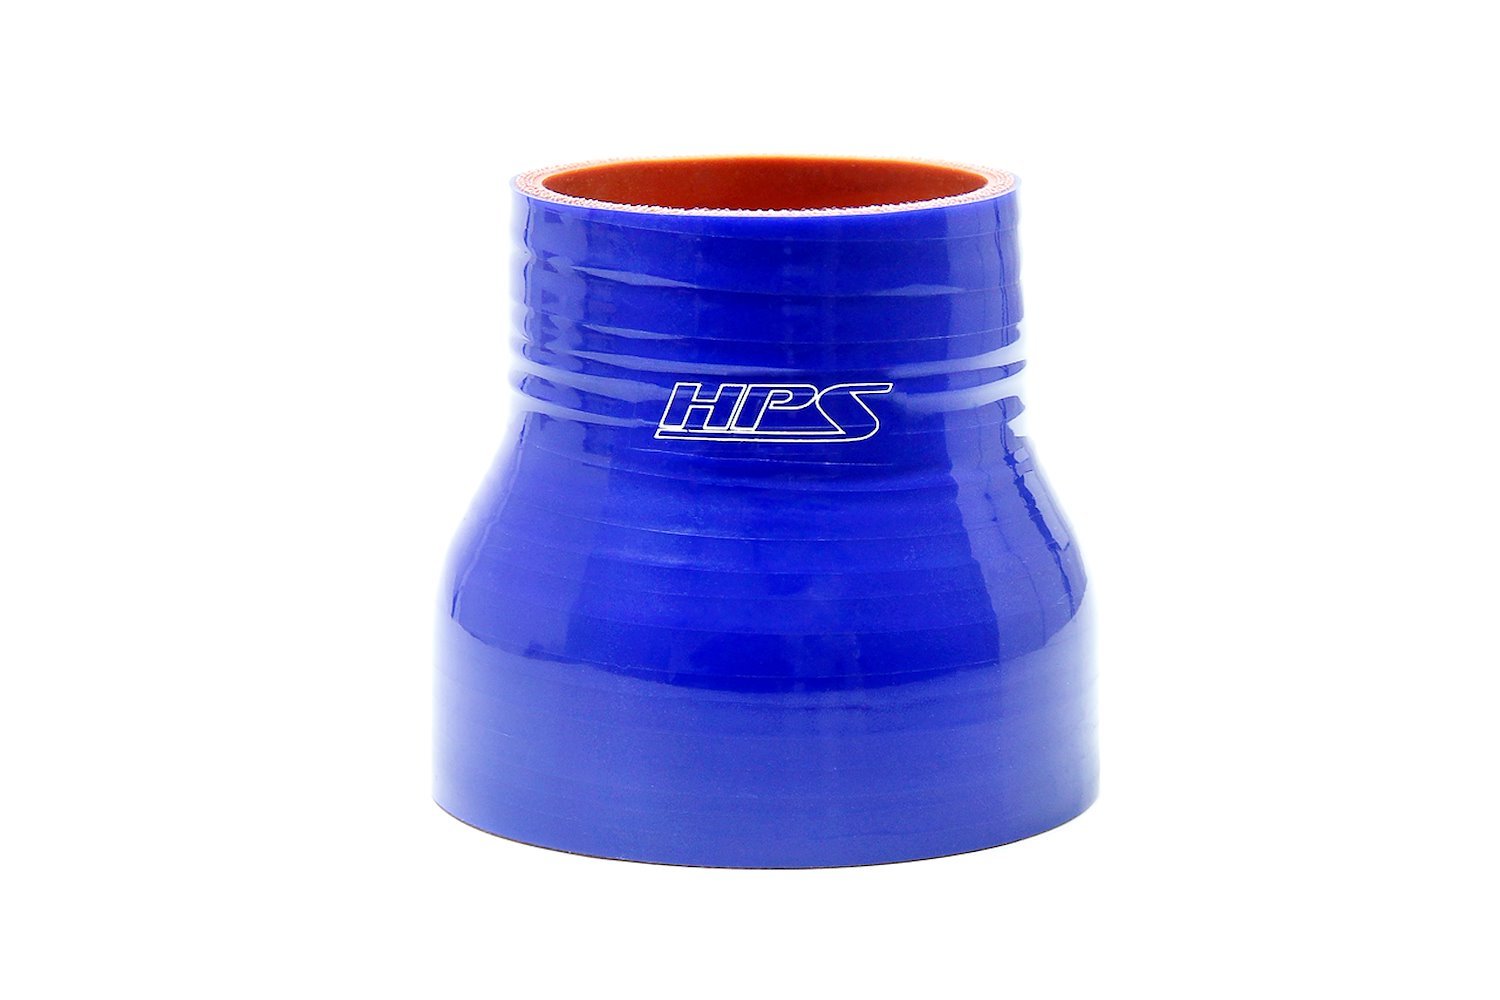 HTSR-162-212-BLUE Silicone Reducer Hose, High-Temp 4-Ply Reinforced, 1-5/8 in. - 2-1/8 in. ID, 3 in. Long, Blue